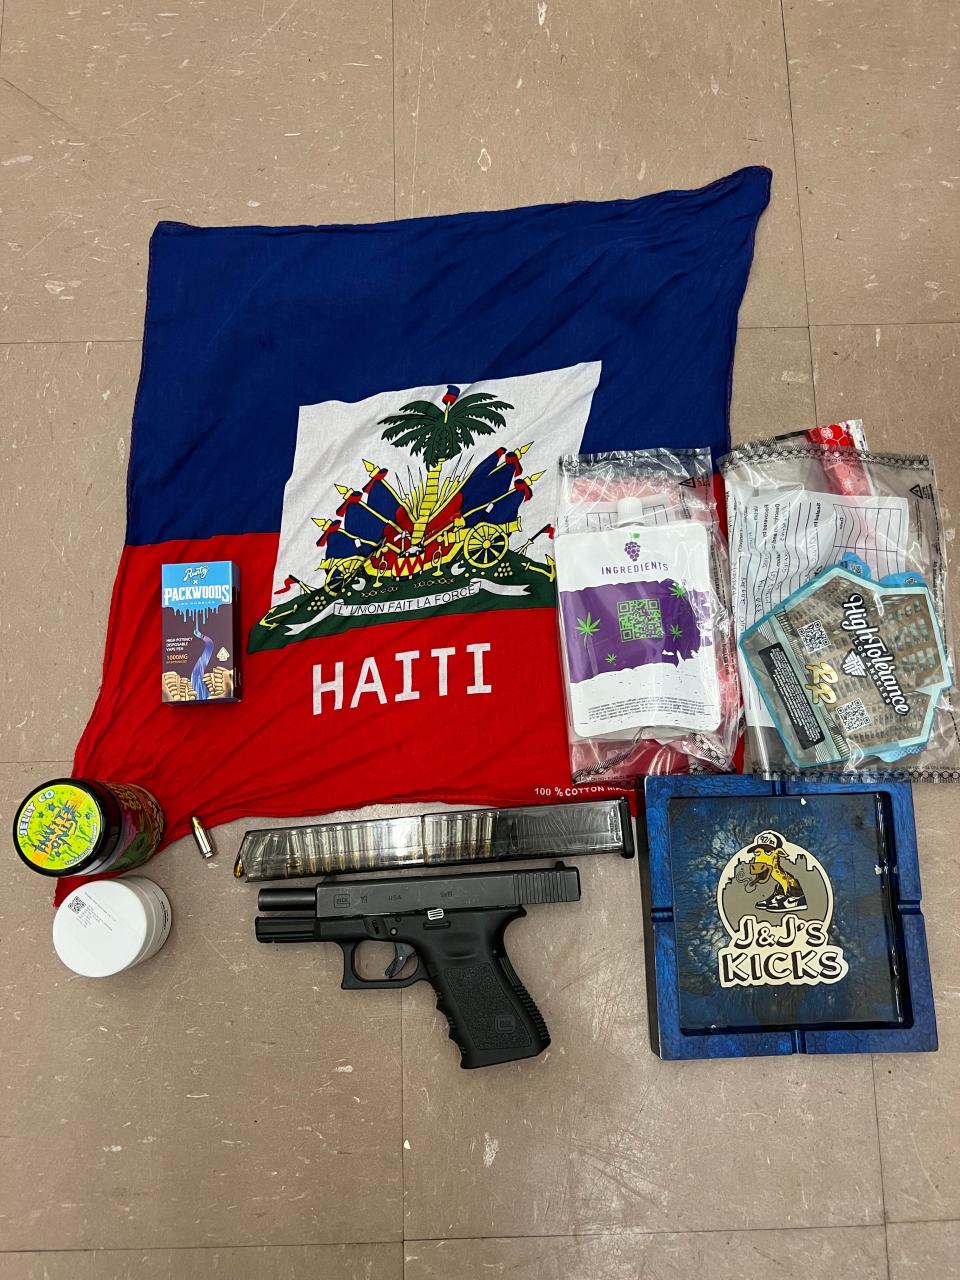 During a March 12, 2024 traffic stop of an armored vehicle driven by the rapper known as Jackboy, or Pierre Delince, 26, of Port St. Lucie, police reportedly found multiple marijuana and THC-related items along with a loaded handgun, according to arrest records.